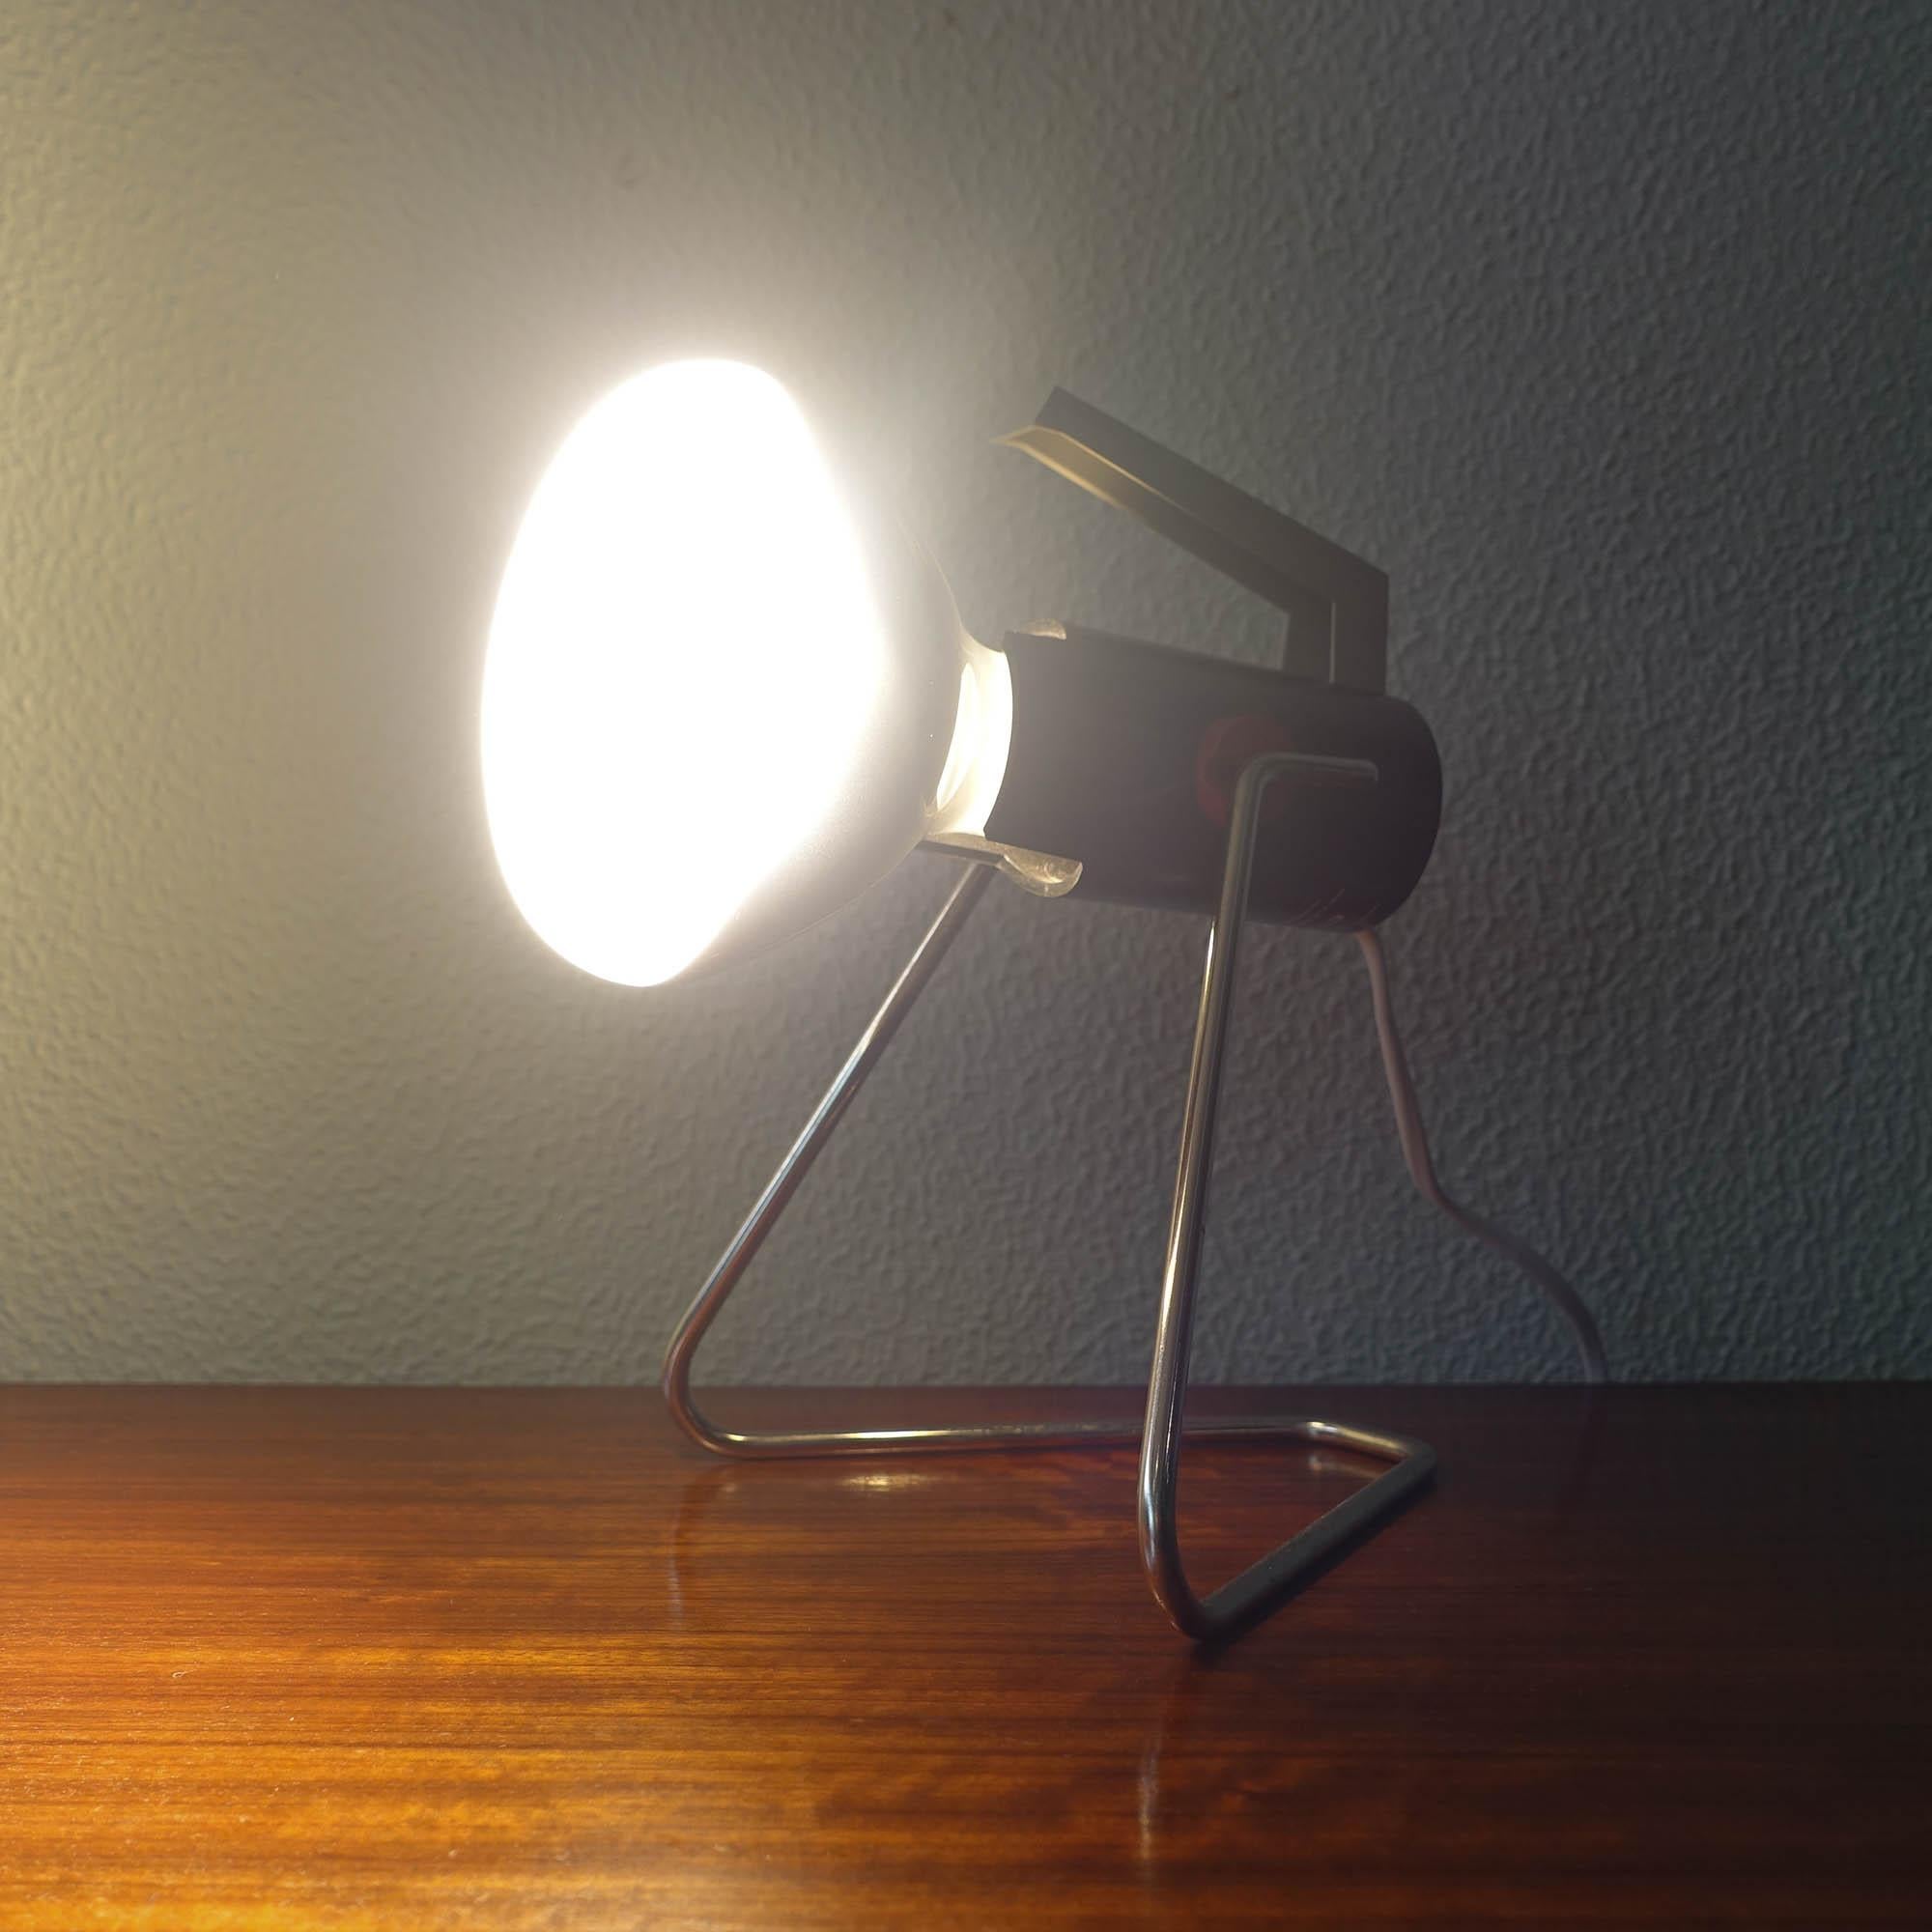 This Philips “infraphil” spot lamp originally intended for light therapy, 1970s. It was designed and produced by Philips, in the Netherlands, during the 1970's. For those long wintery days, the Sunlamp brings a touch of warmth and light to any